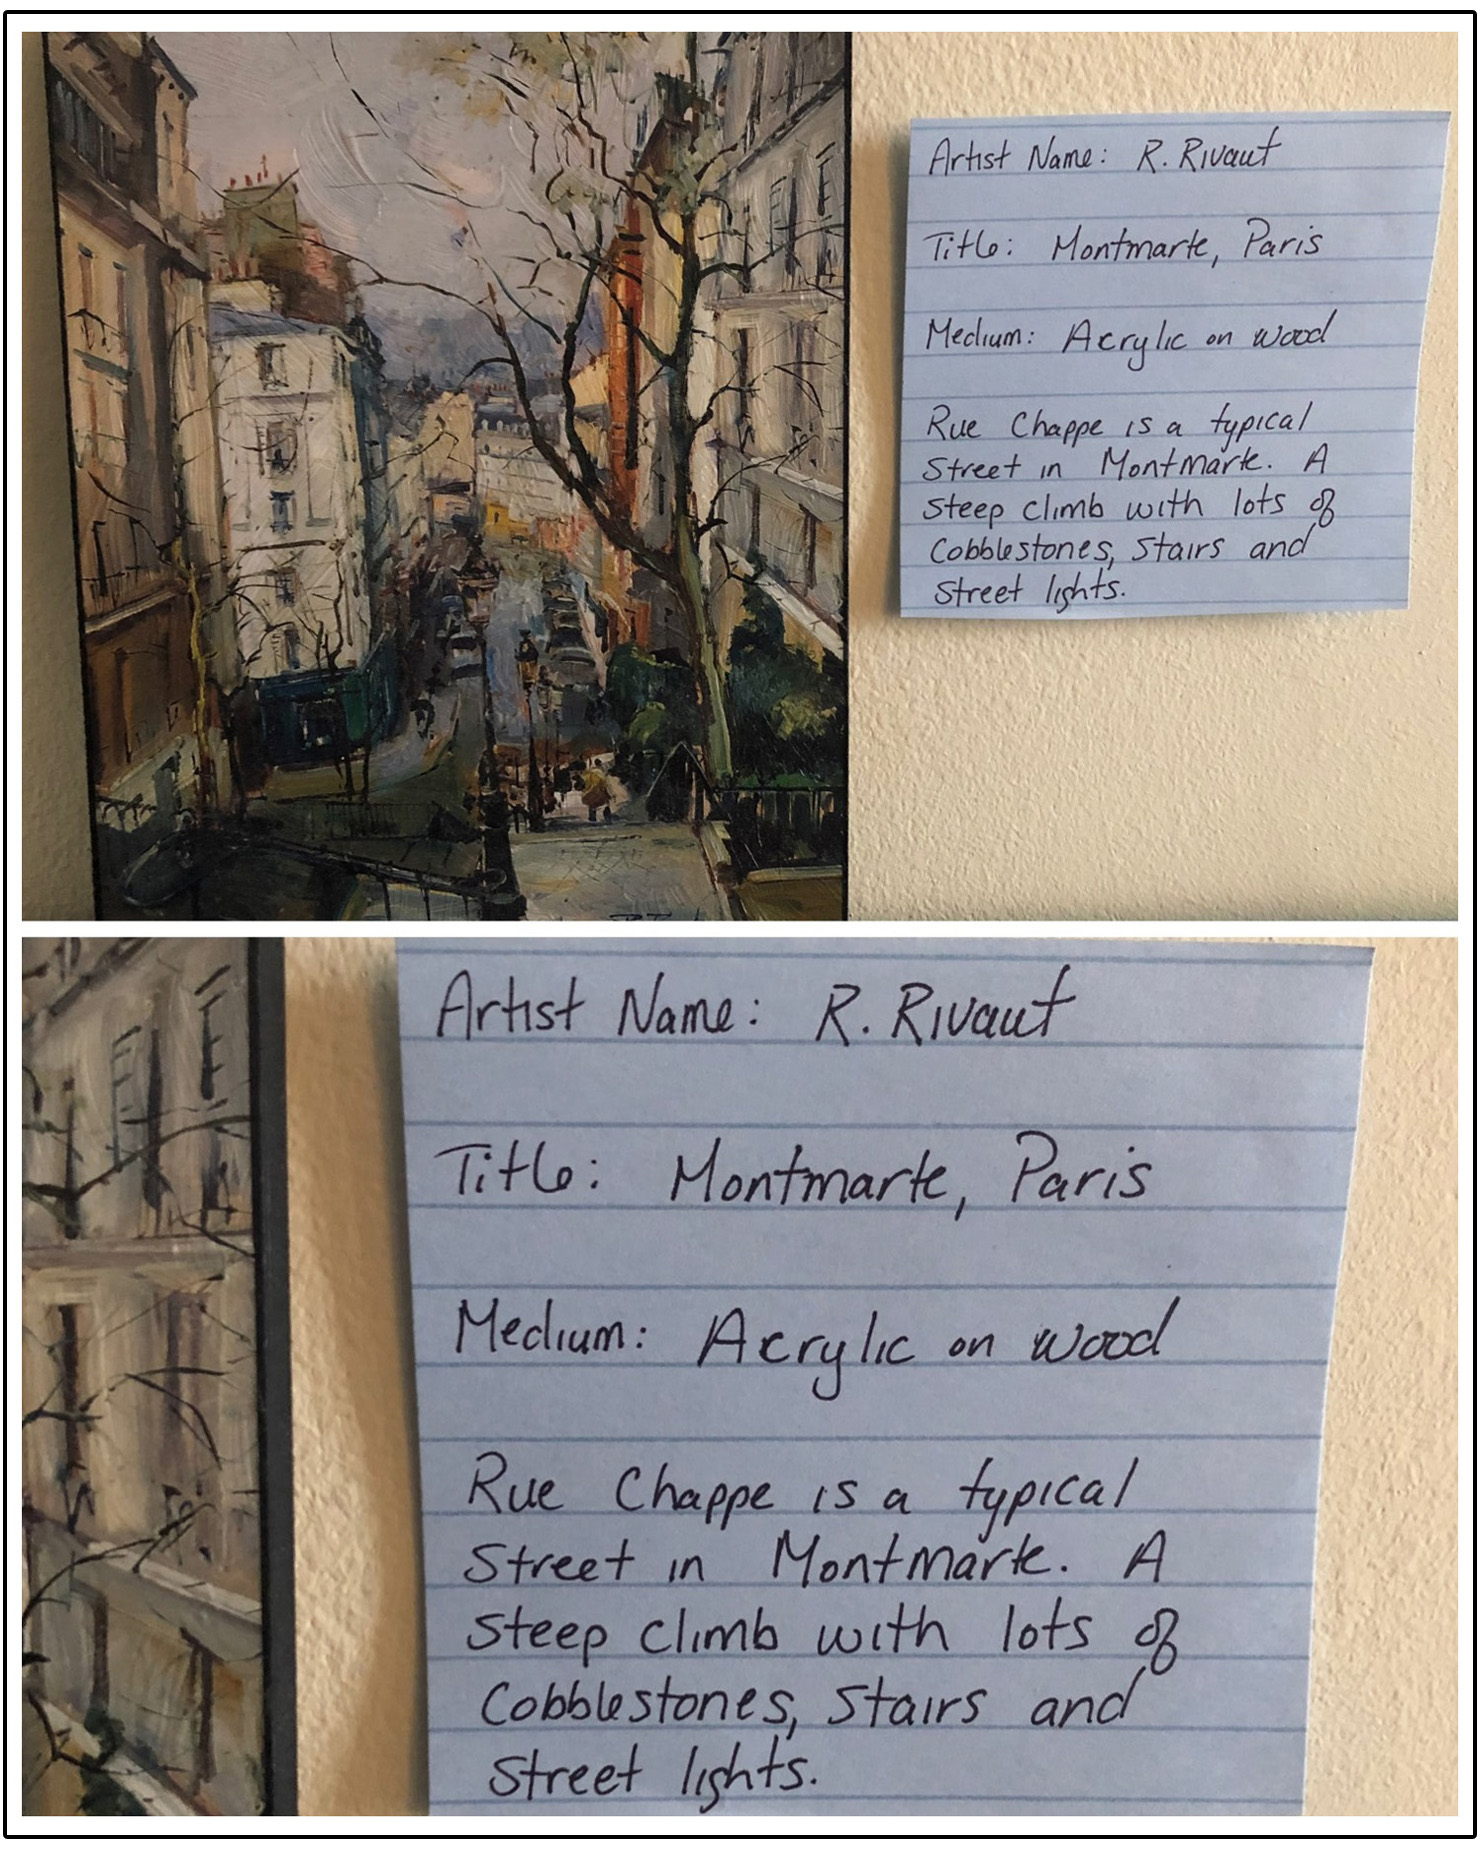 museum style label for painting of Montmartre in Paris